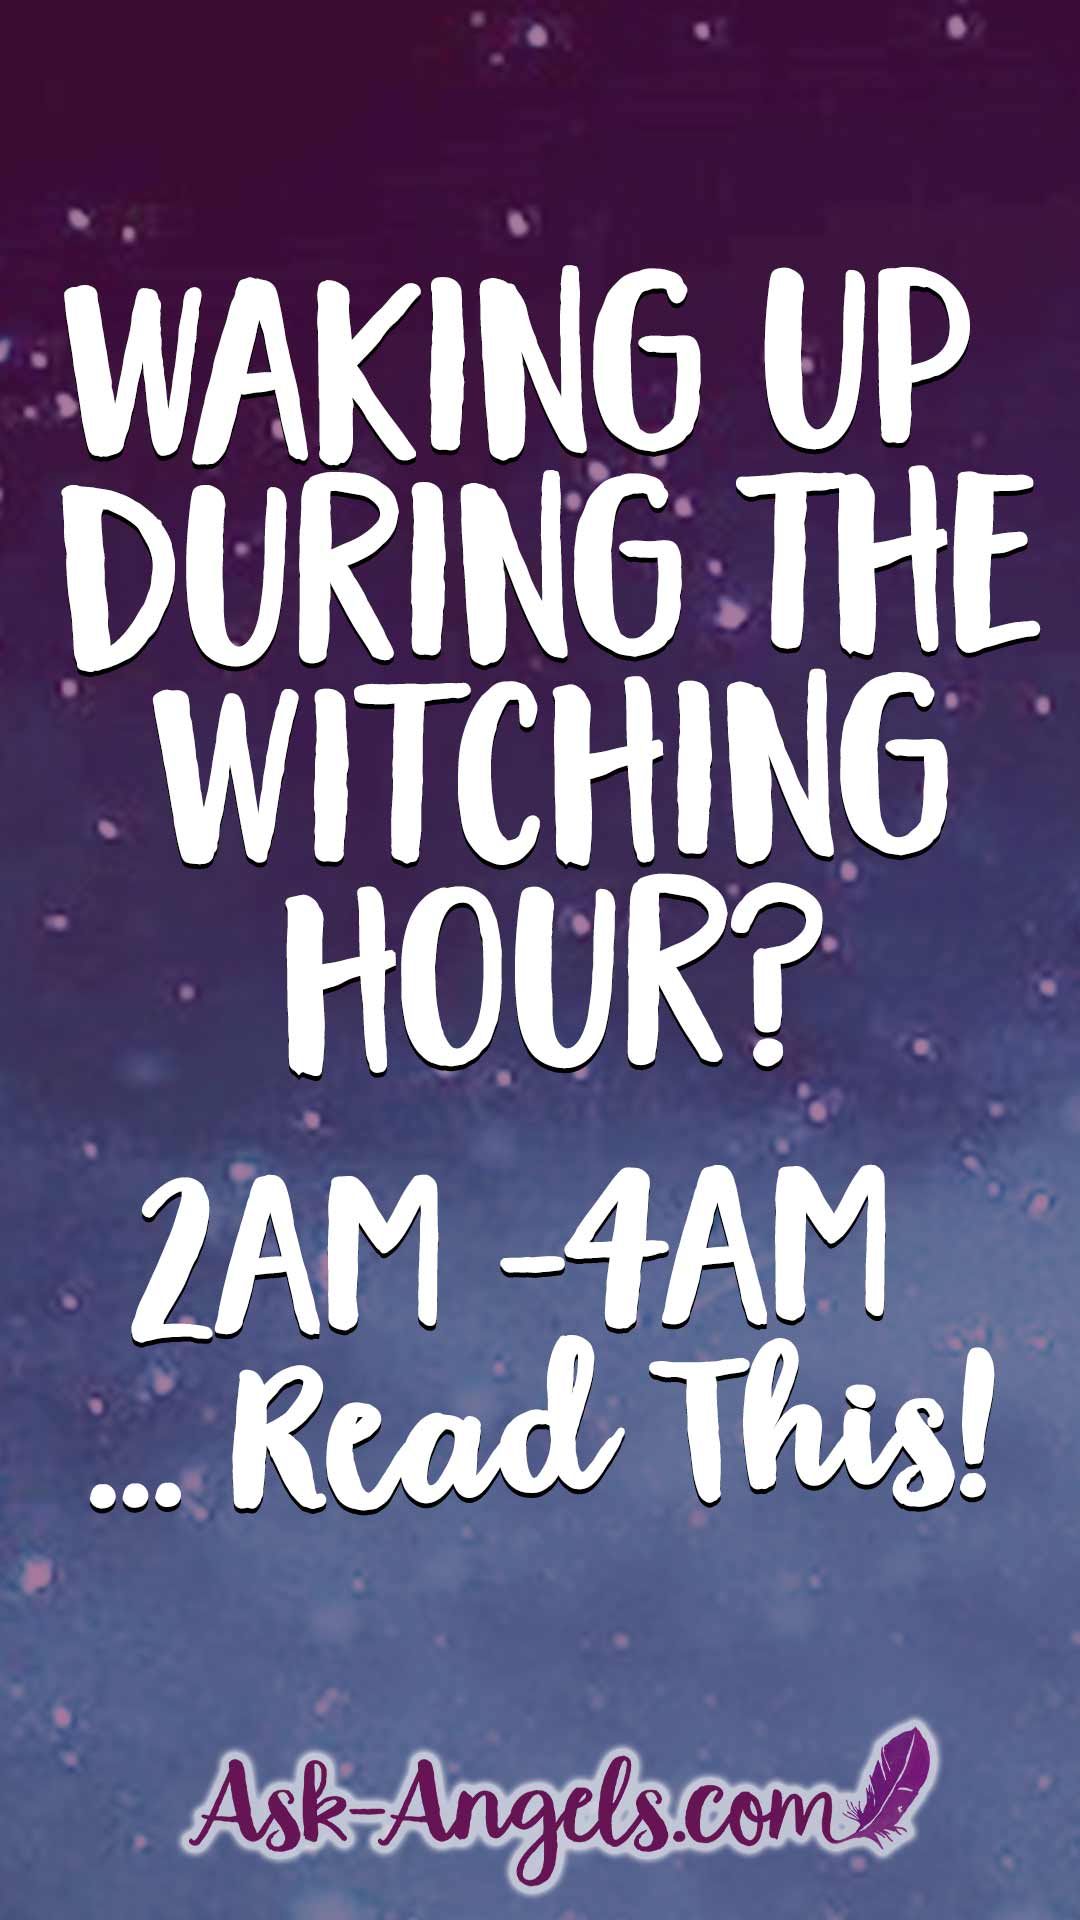 Waking Up During the Witching Hour? Read This!